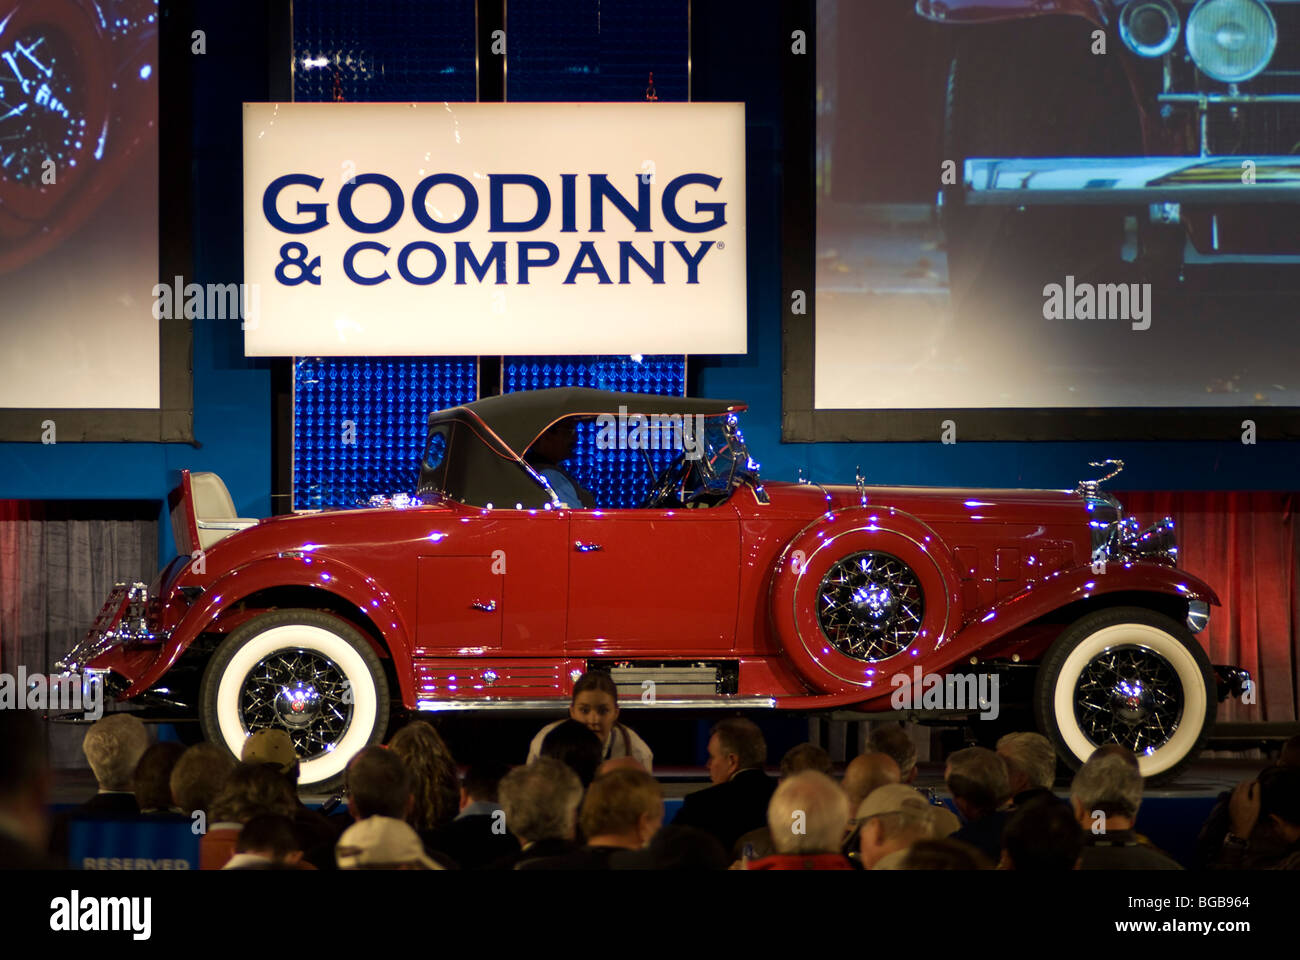 A classic car is auctioned at a Gooding auction Stock Photo